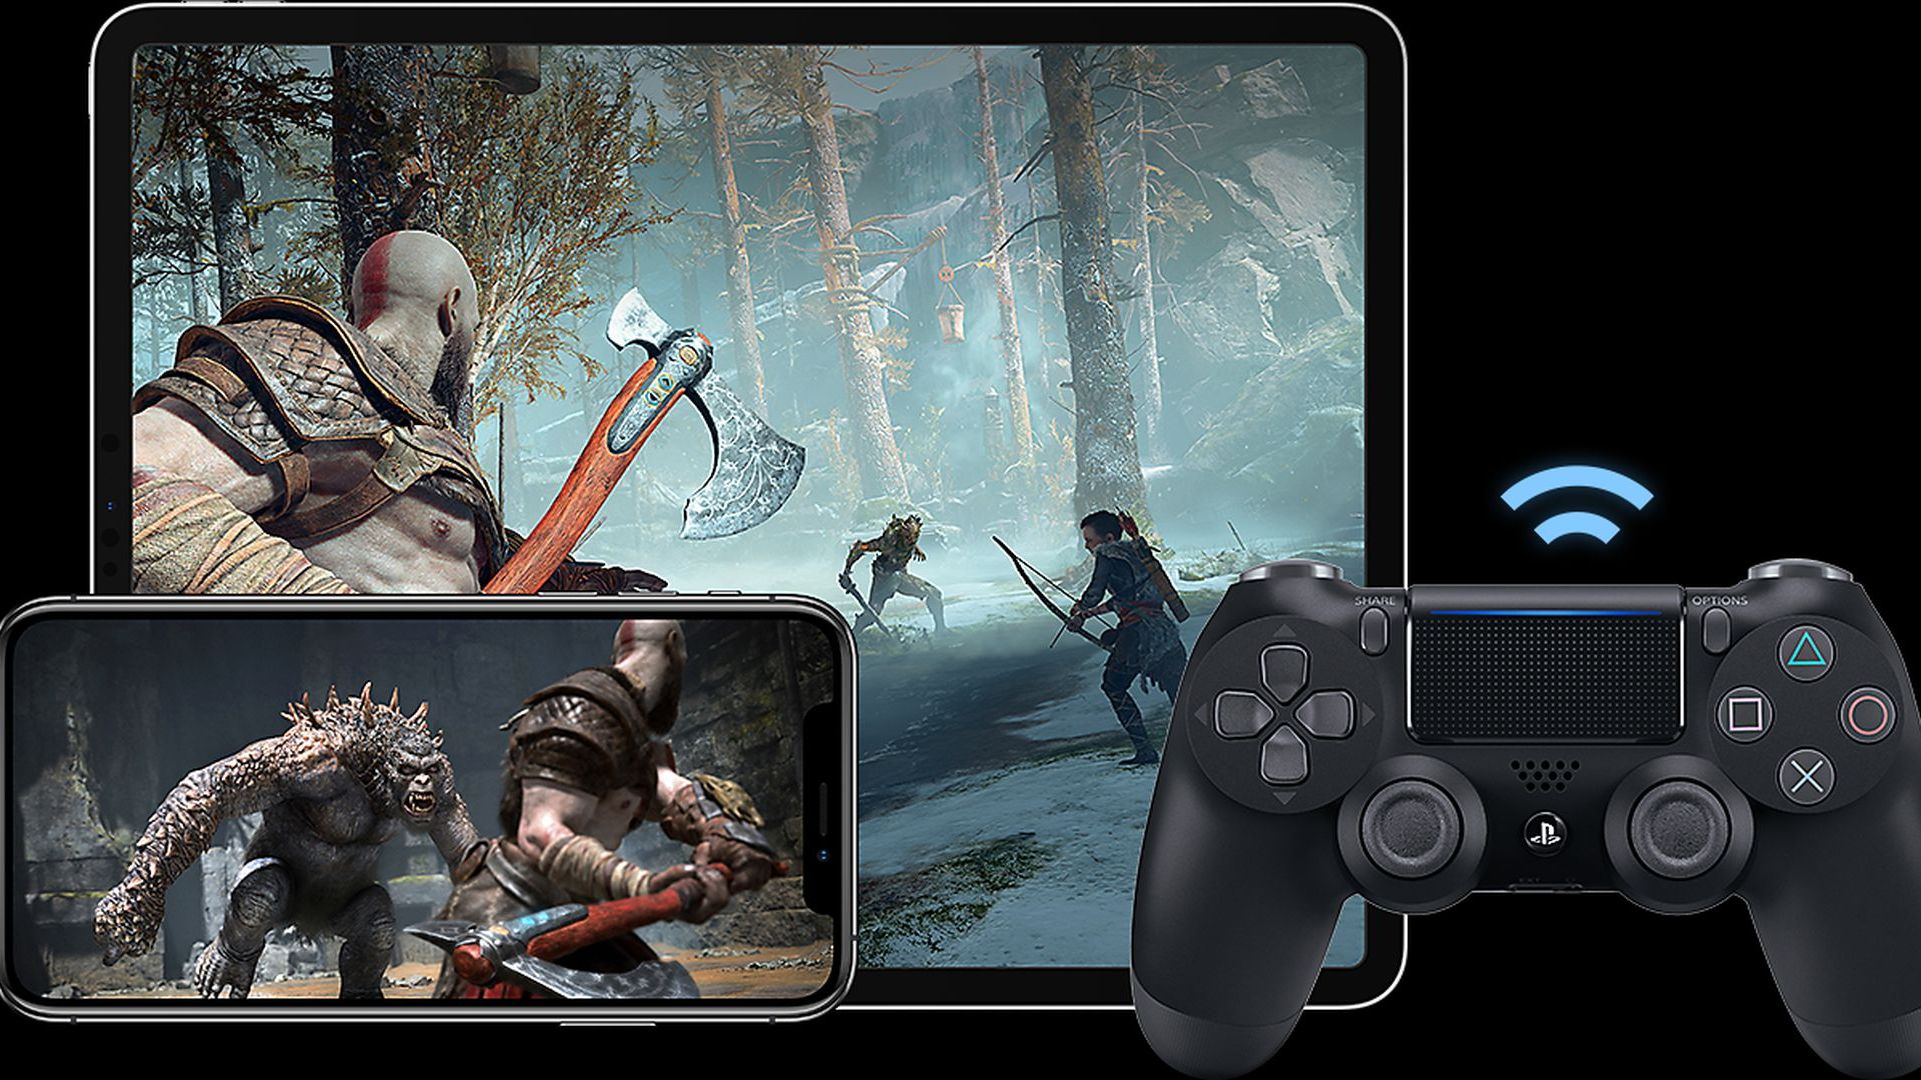 remote play ps4 2020